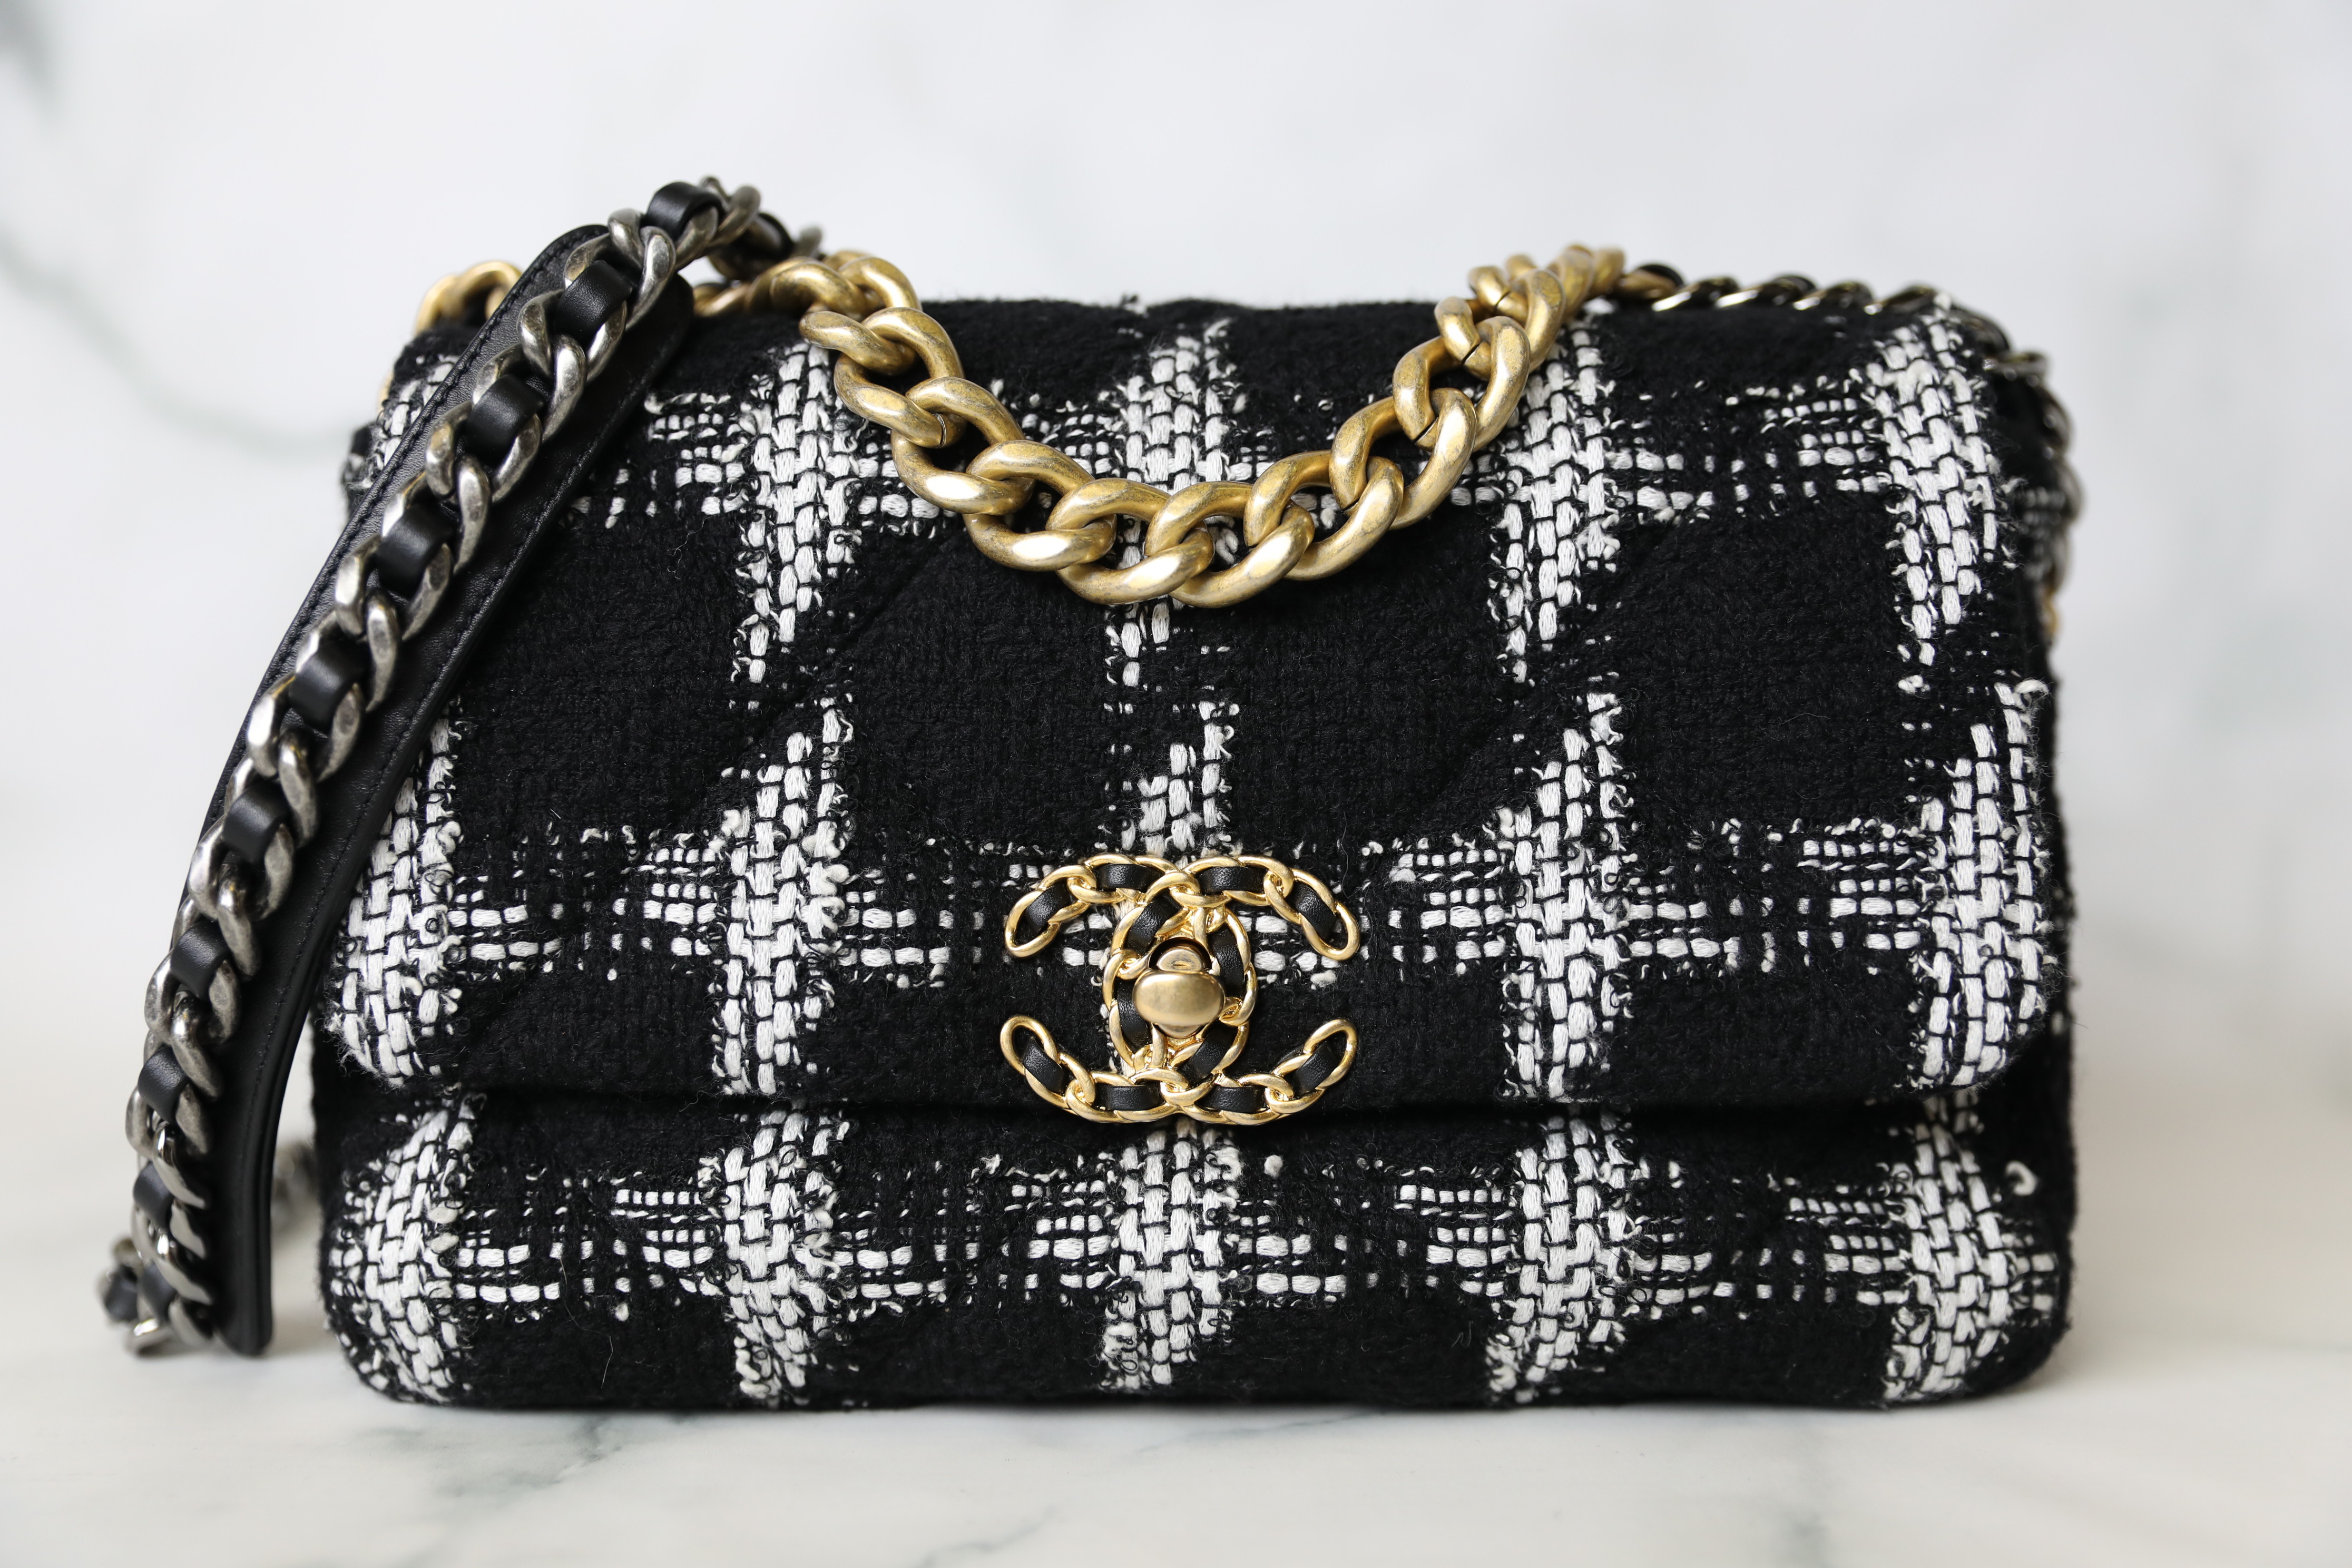 Chanel 19 Small, Black and White Houndstooth Tweed, Preowned in Box WA001